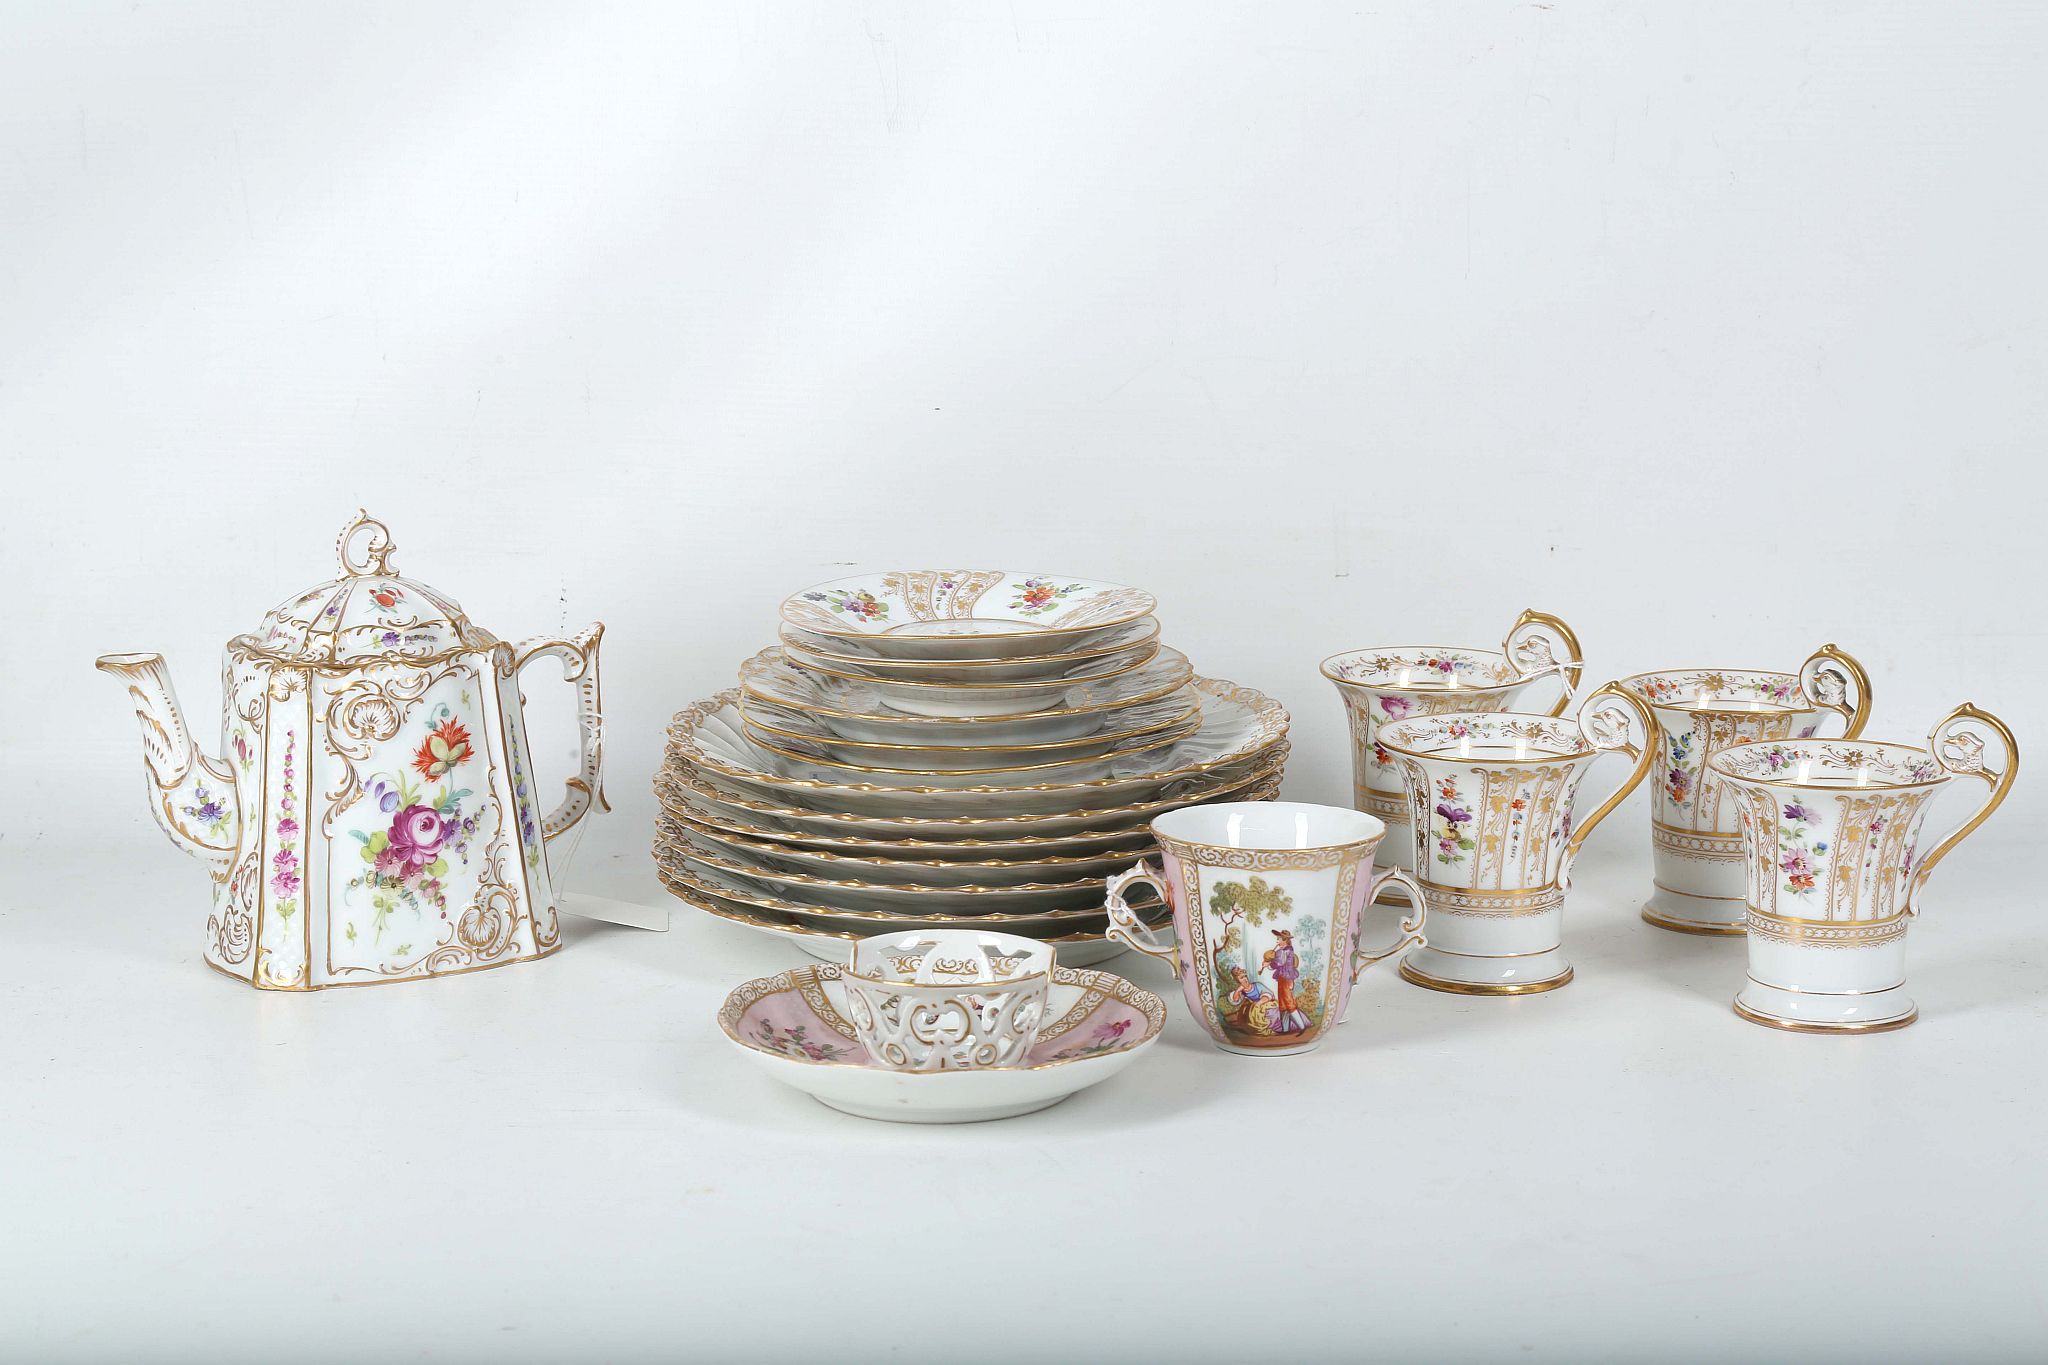 A collection of Dresden porcelain tea and dinnerware, late 19th Century, finely painted in the - Image 2 of 2